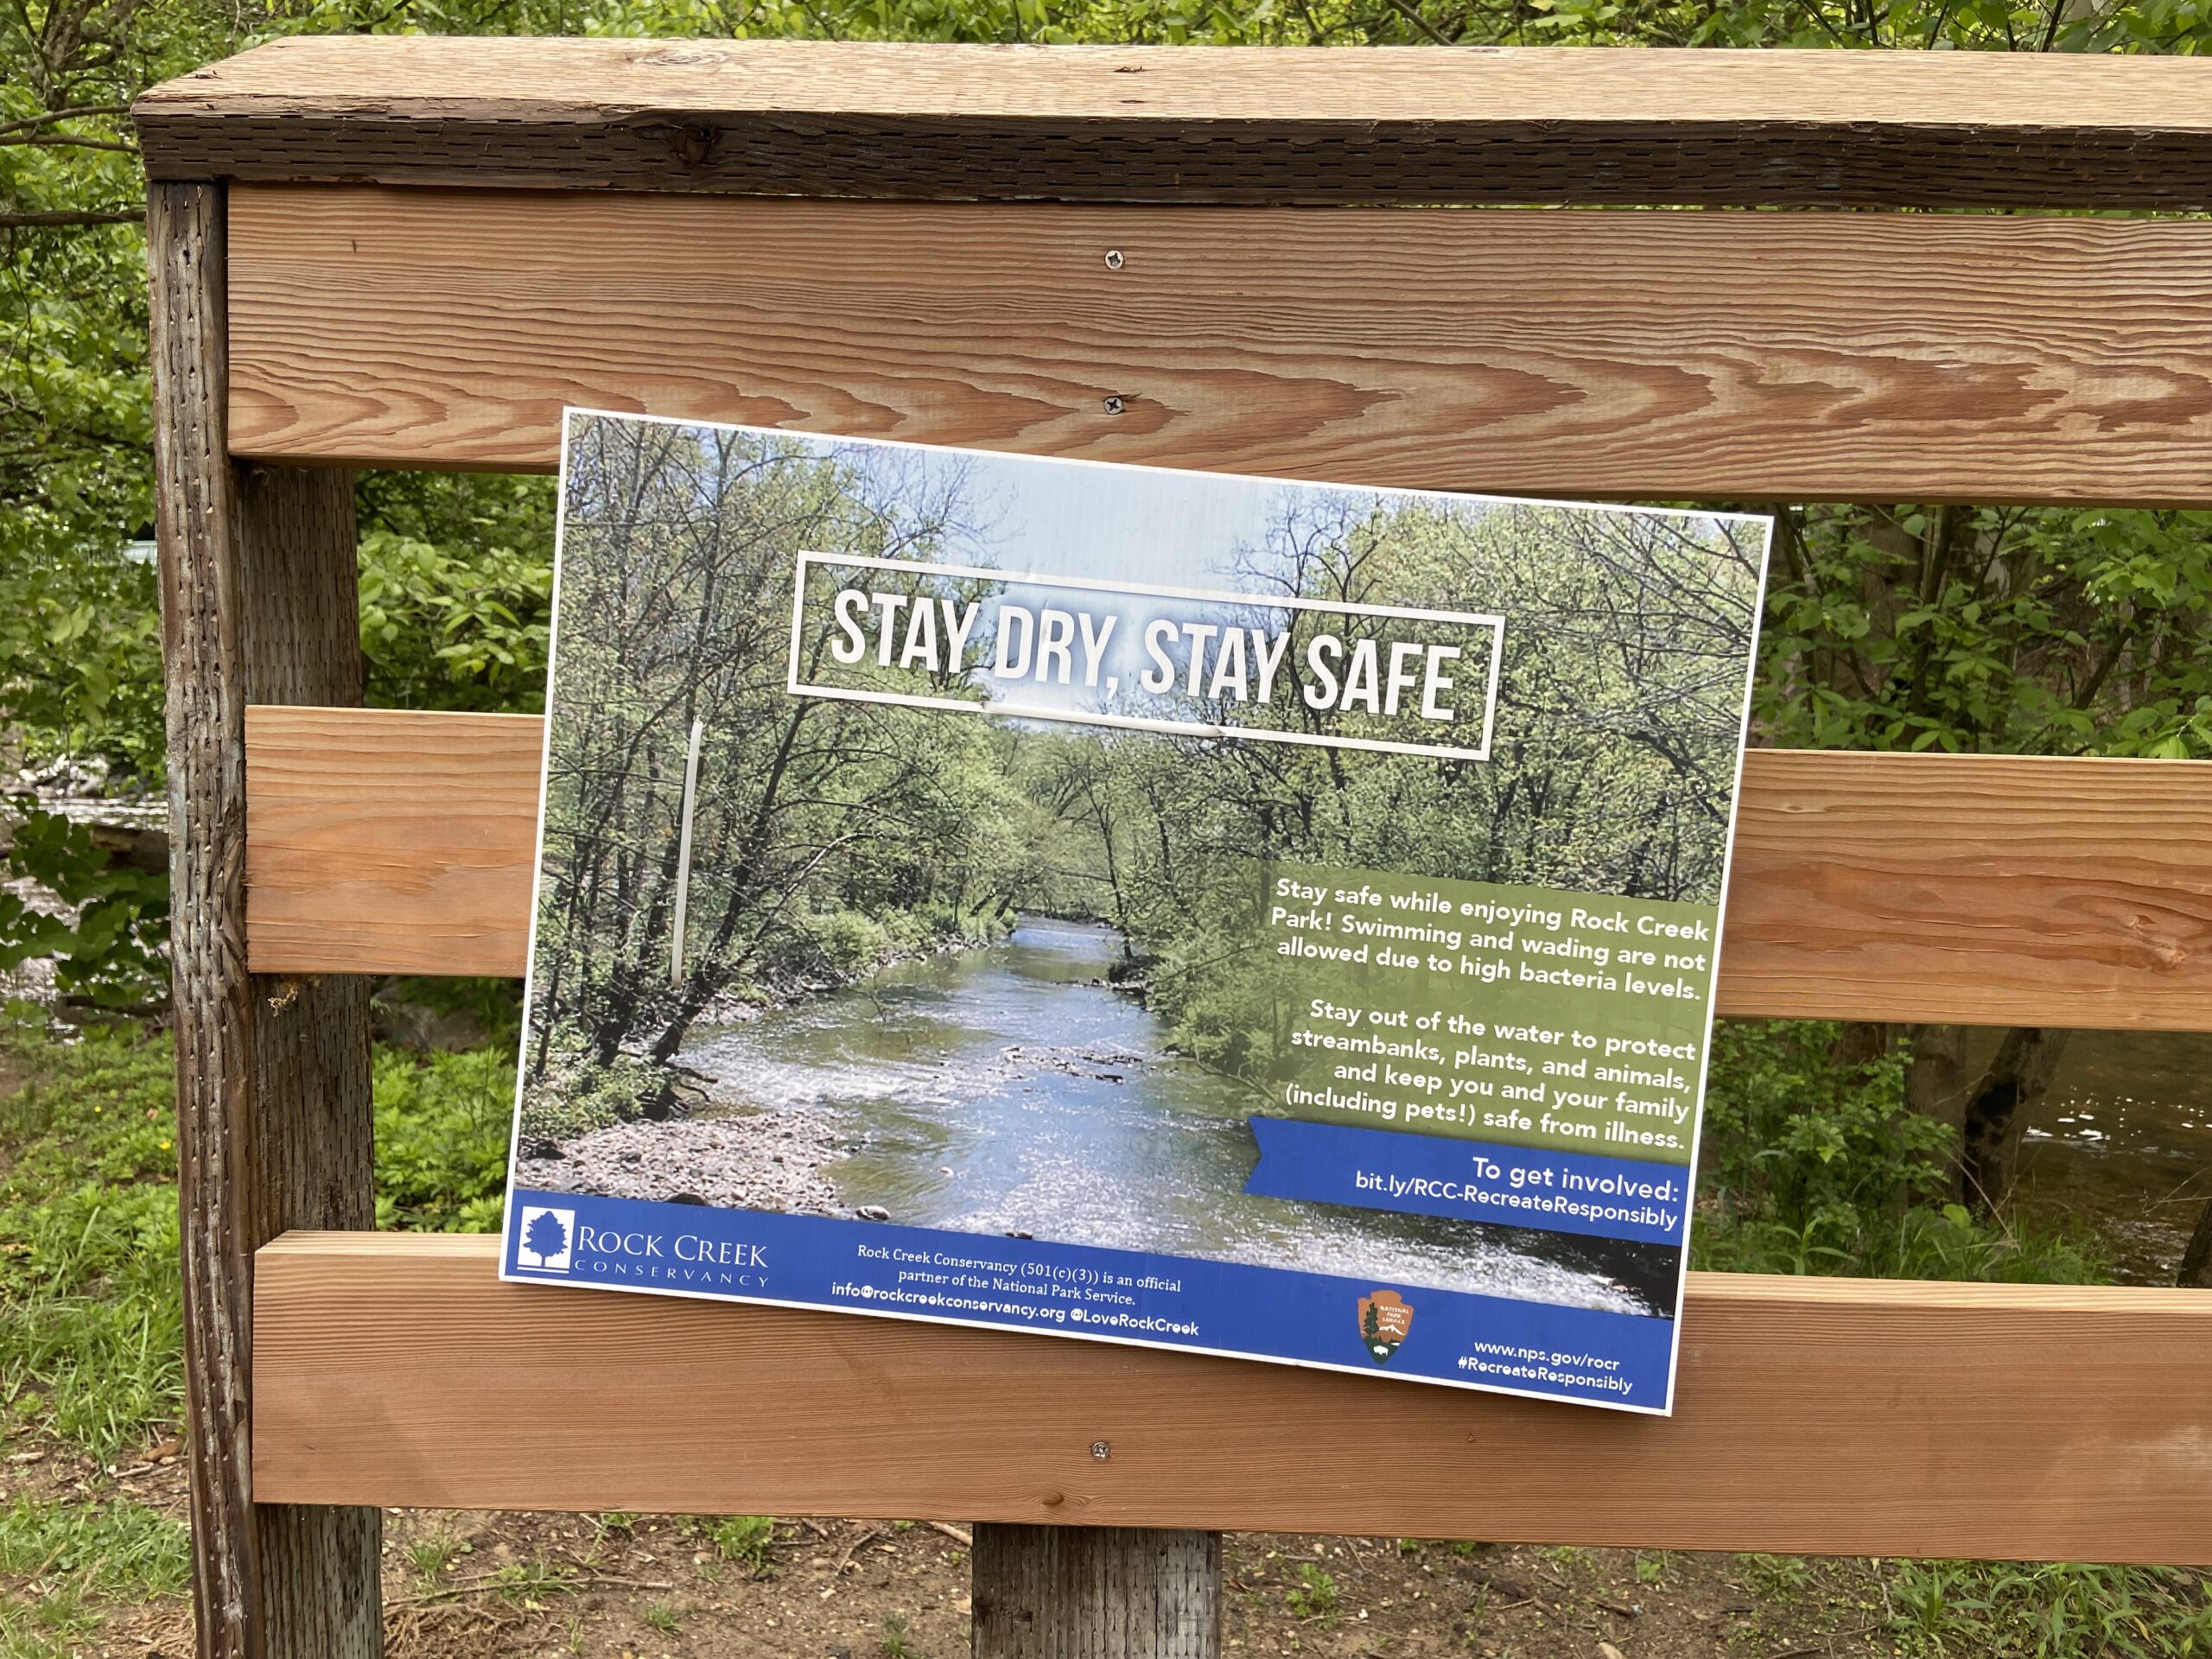 A sign on a wooden fence in a park reads "STAY DRY, STAY SAFE"